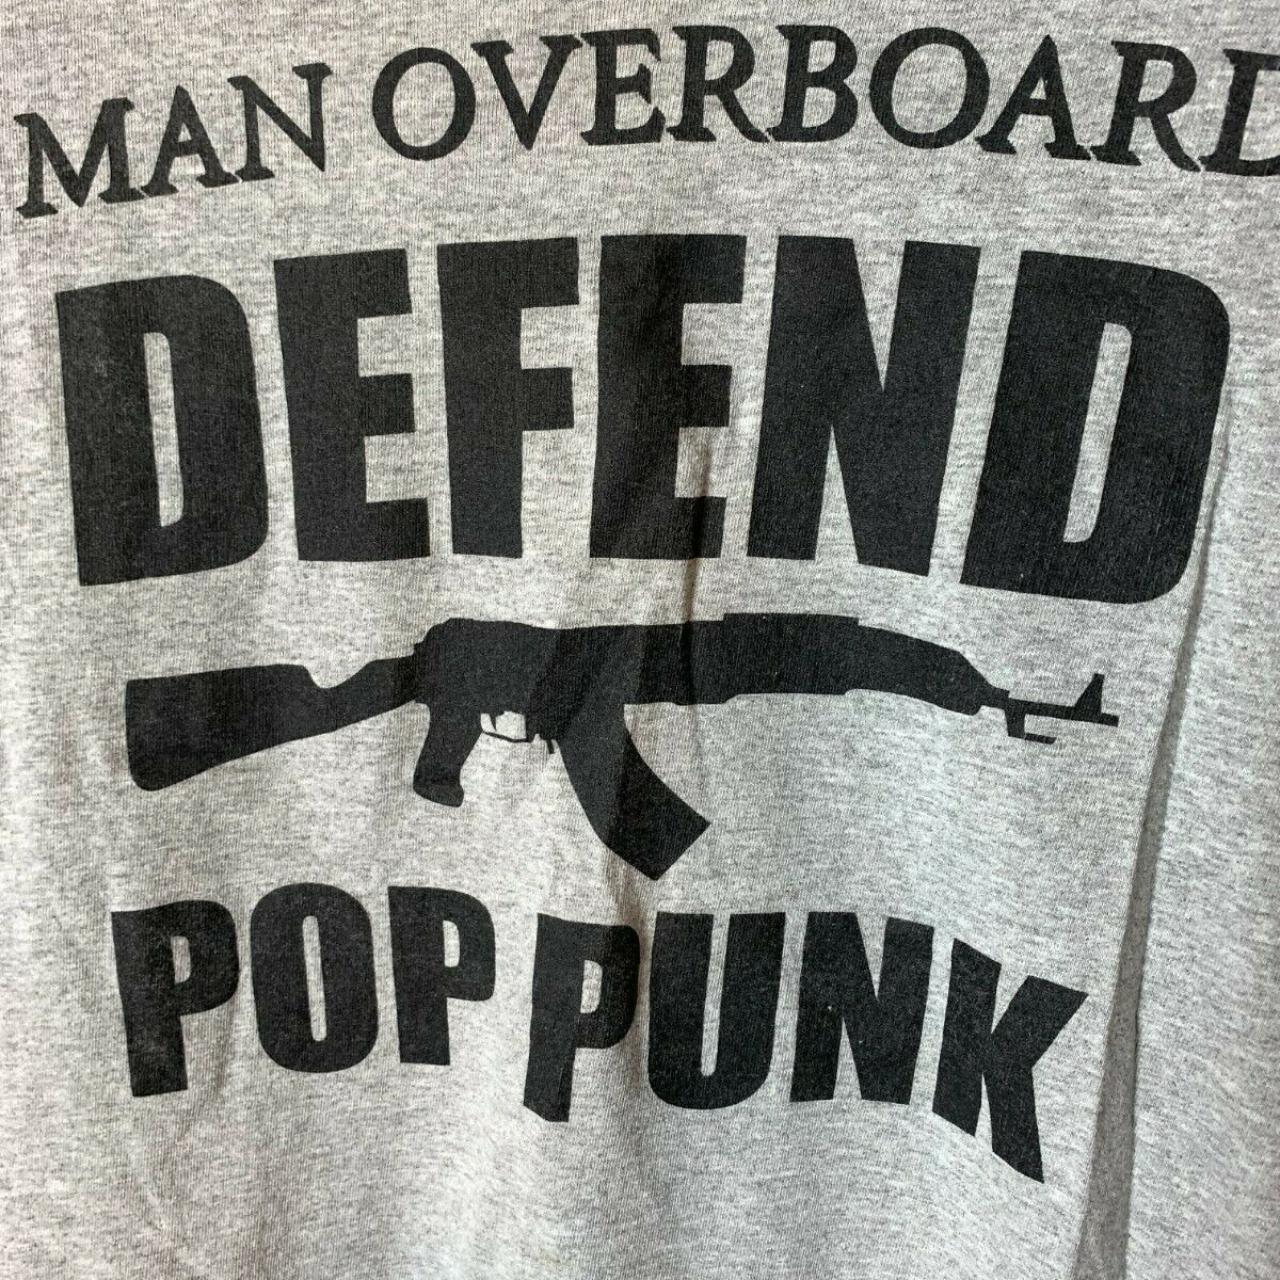 Product Image 3 - Man Overboard Defend Pop Punk